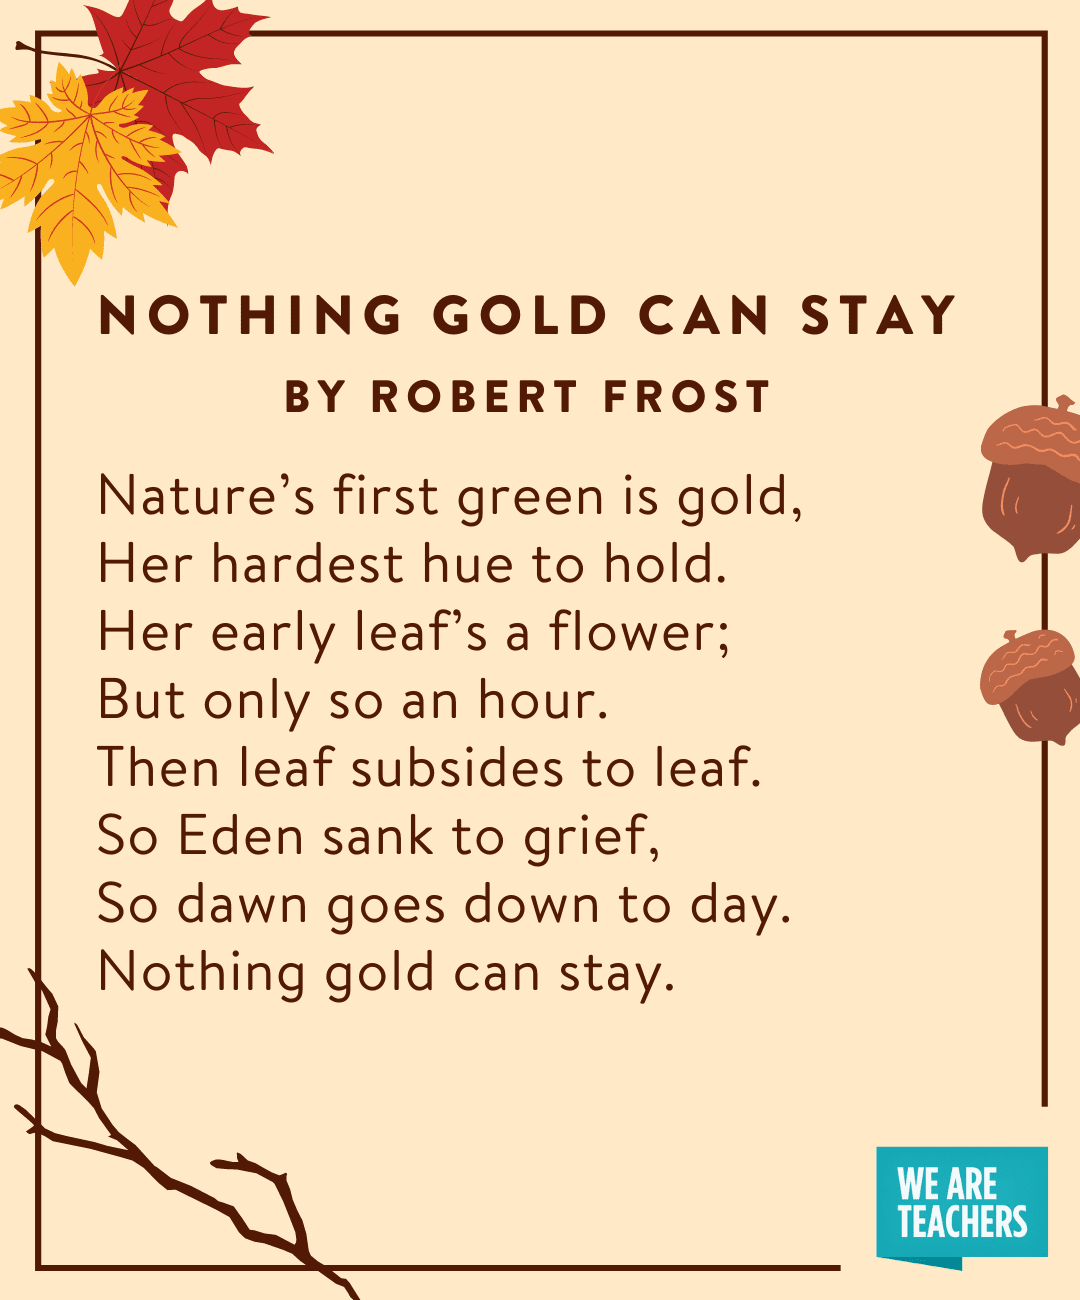 Nothing Gold Can Stay poem